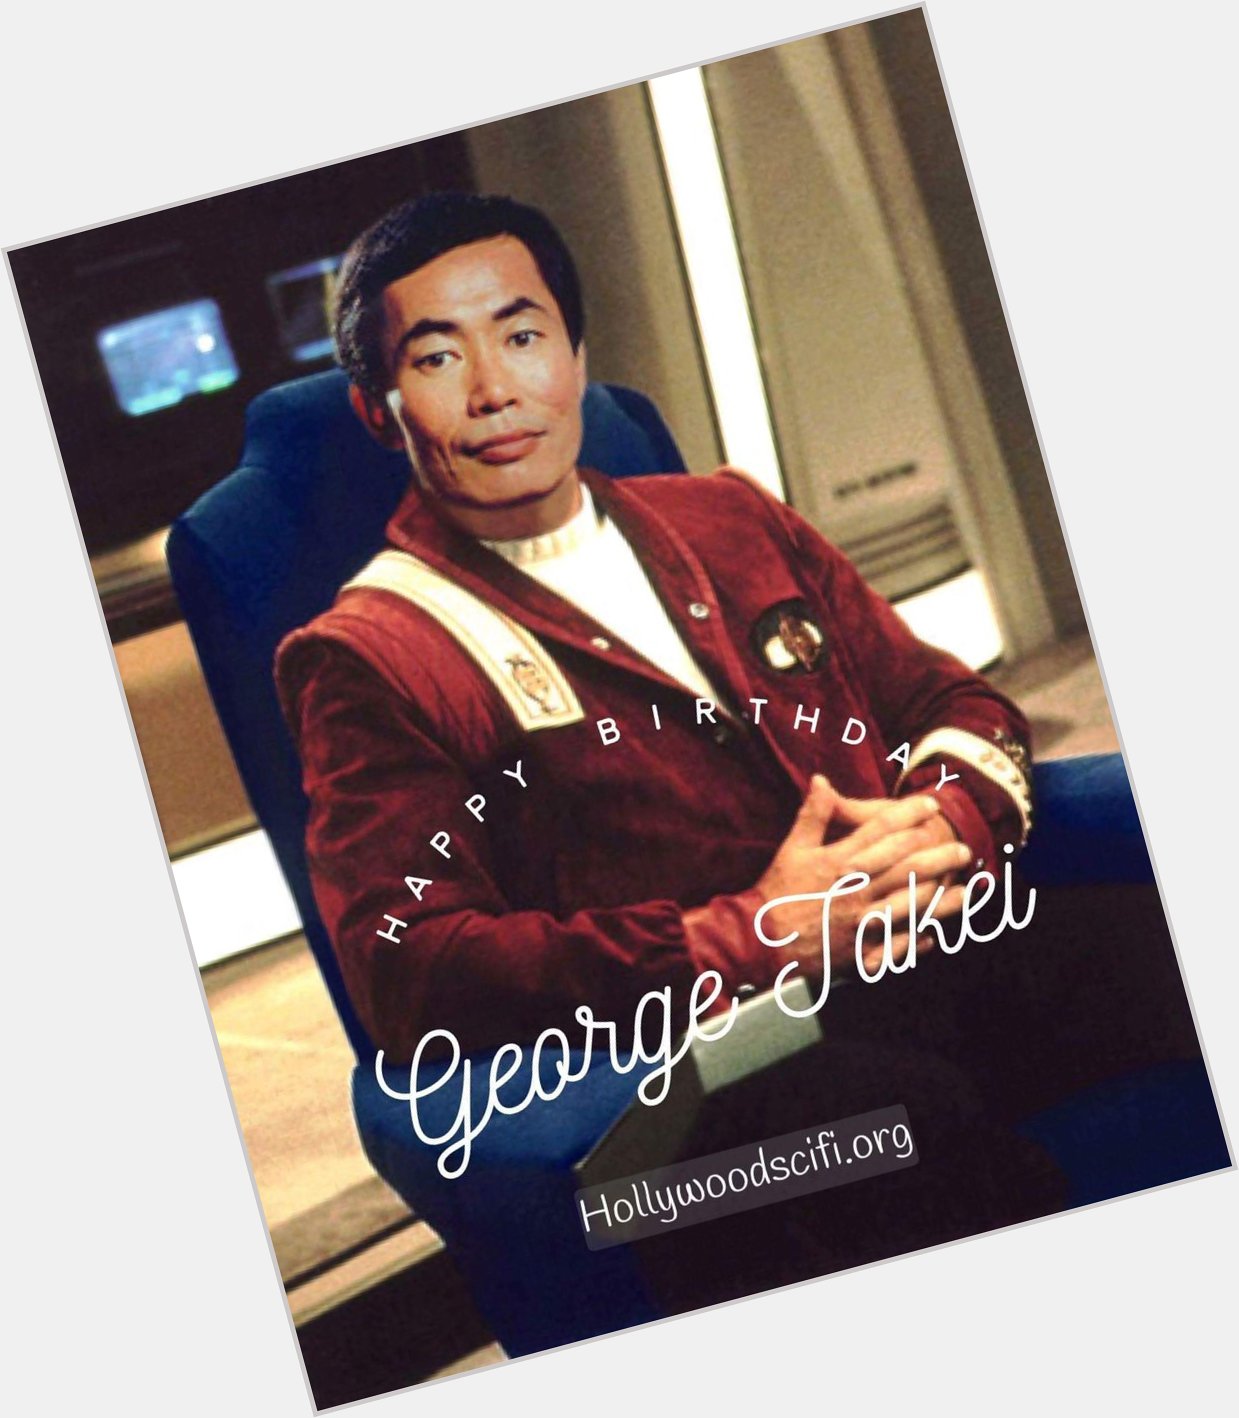 Happy Birthday George Takei! We hope you have a great day and many more.   